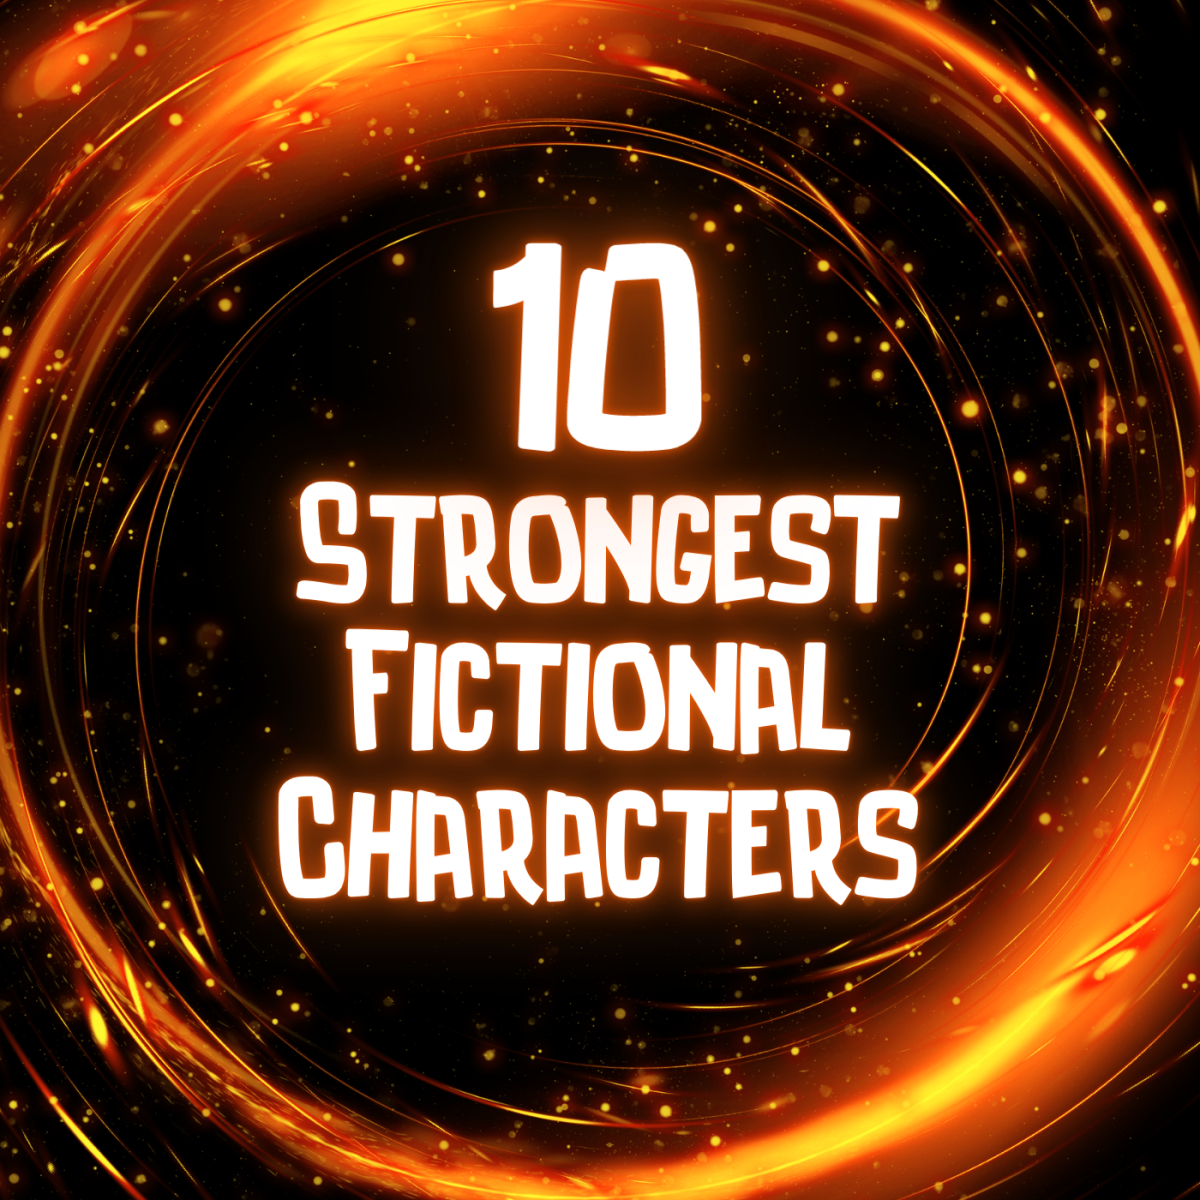 10 Strongest Fictional Characters